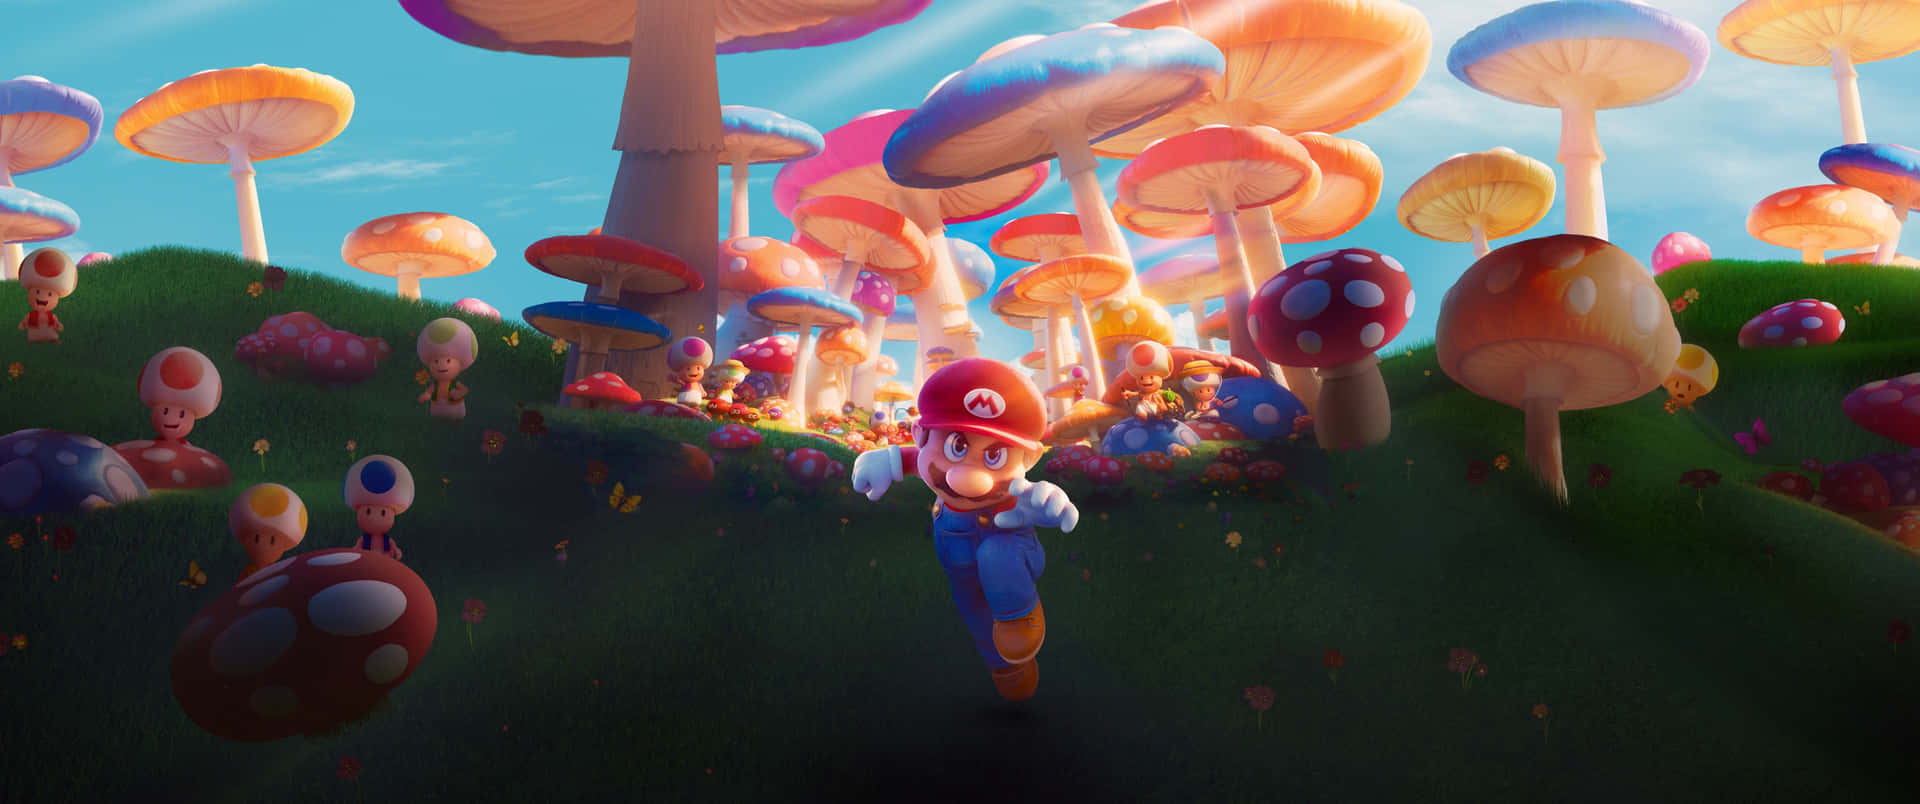 Mario And Mushrooms In A Field